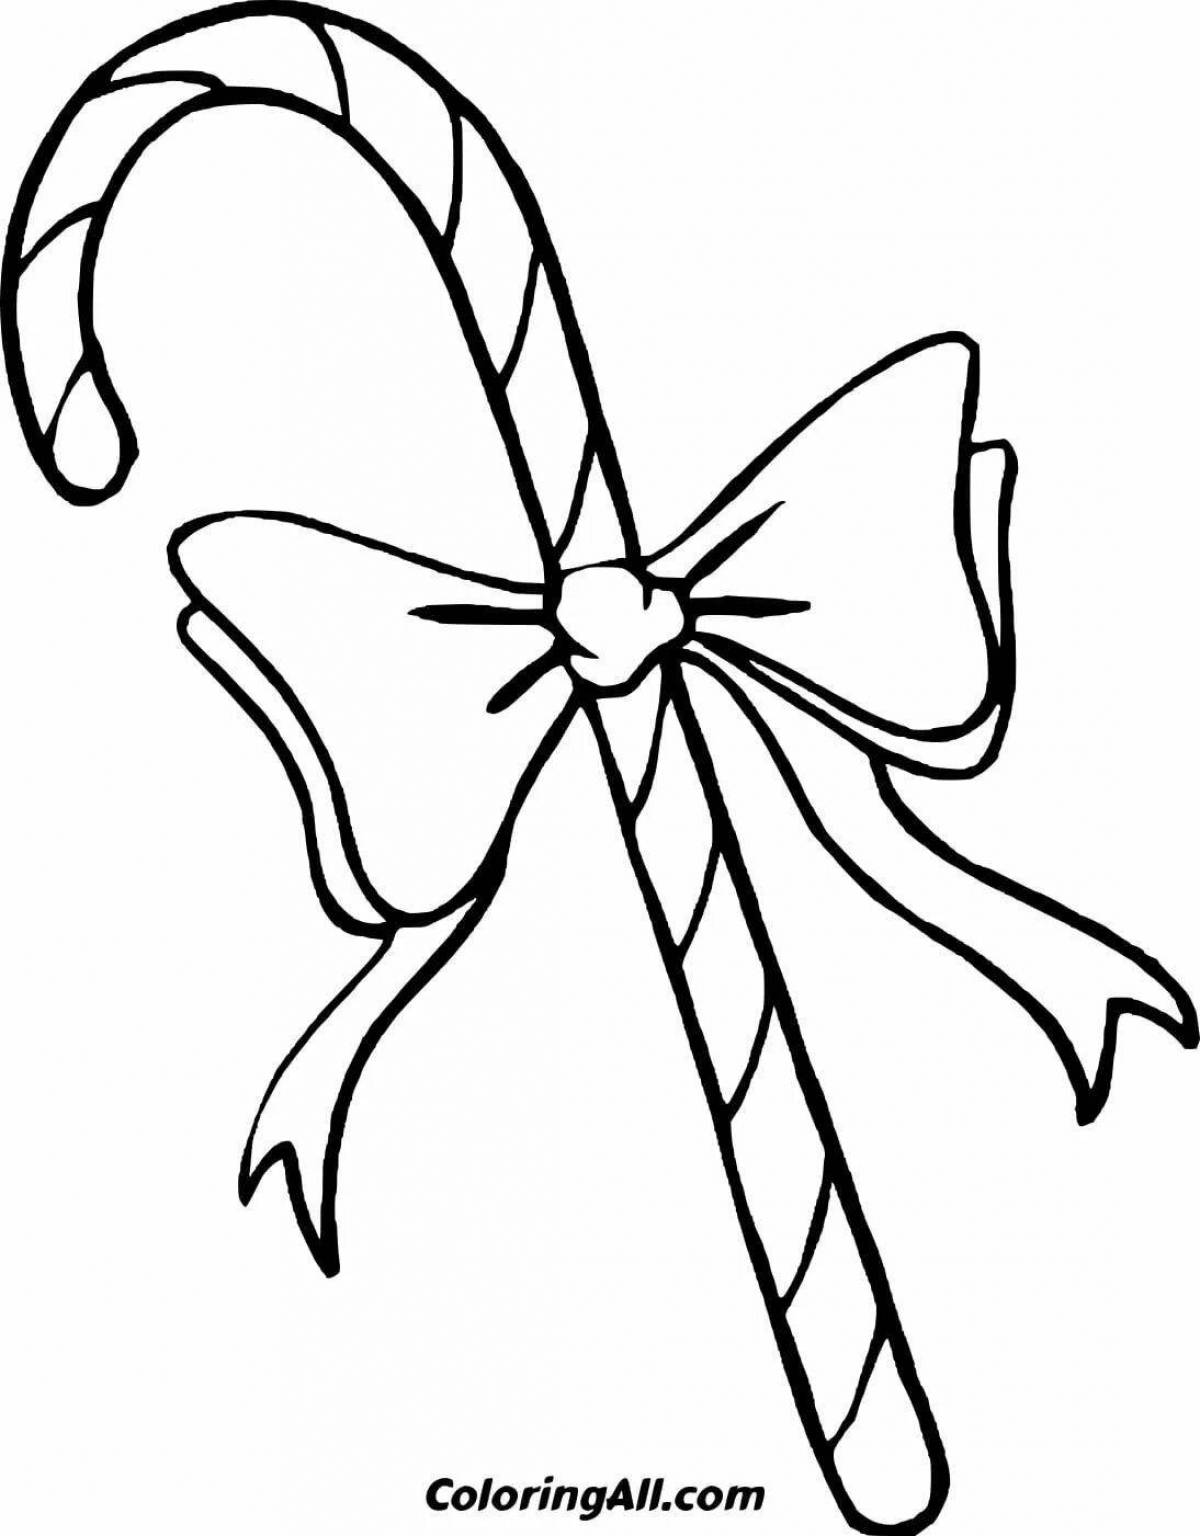 Gorgeous bow coloring for kids